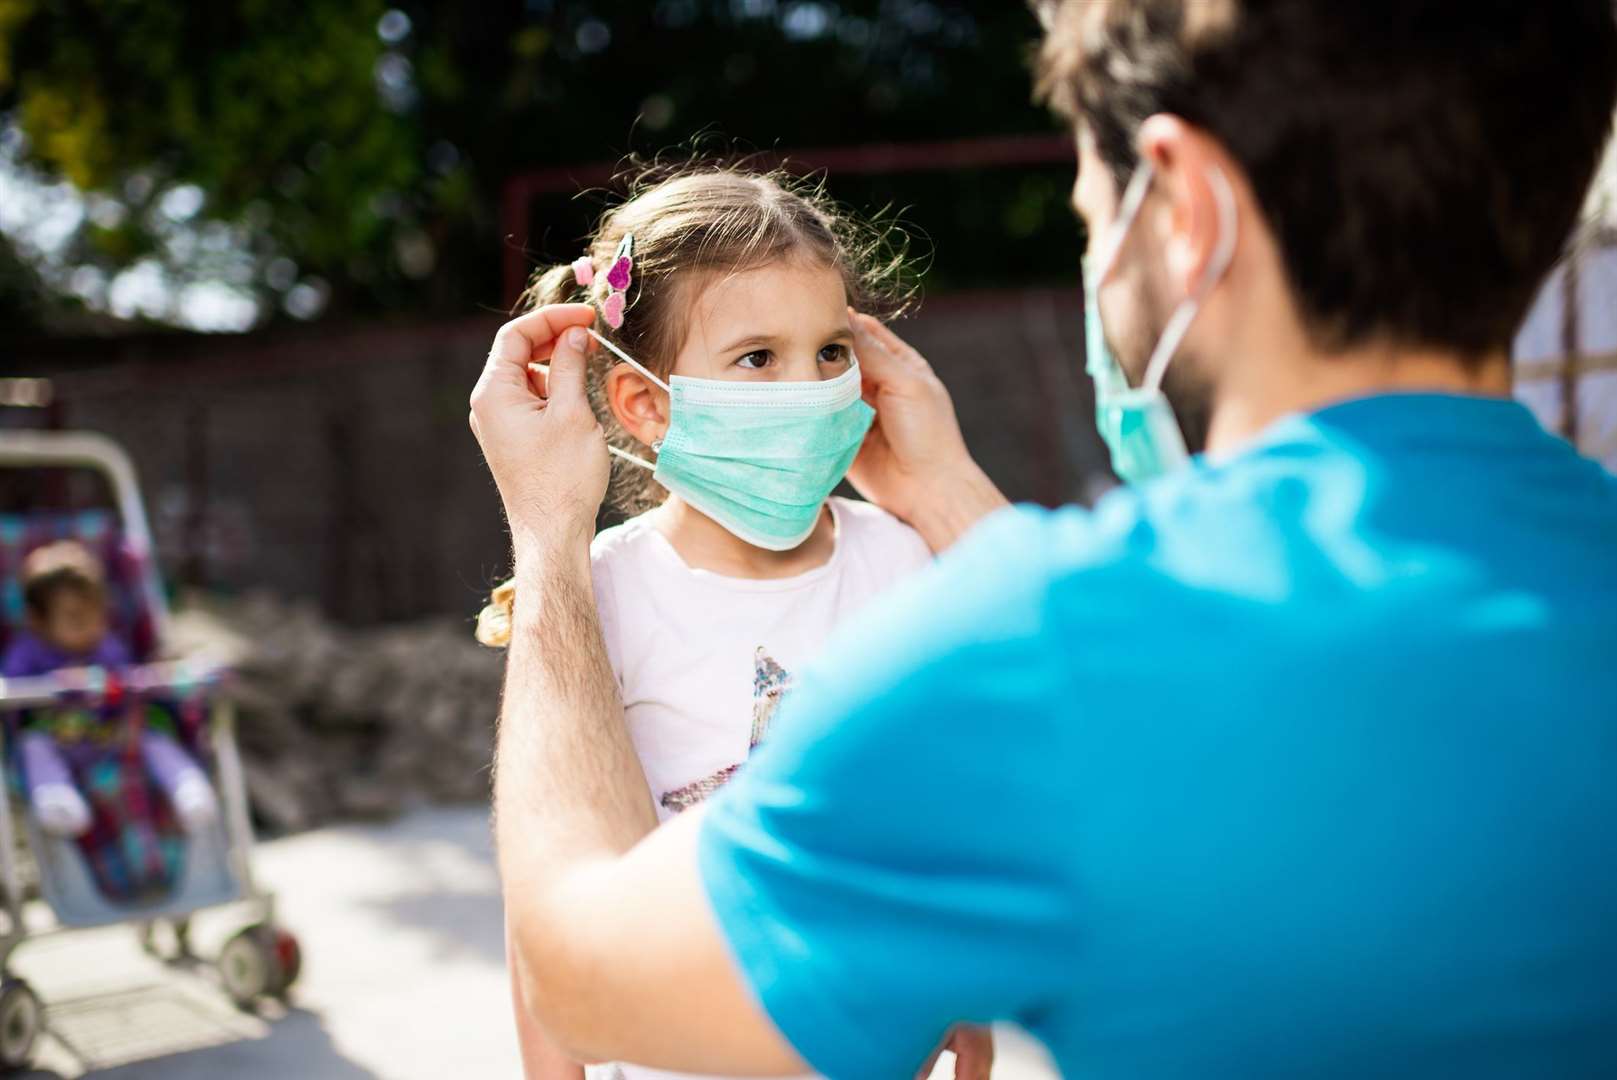 Face masks or coverings for children are not compulsory for those under 11 and should not be given to children under three.